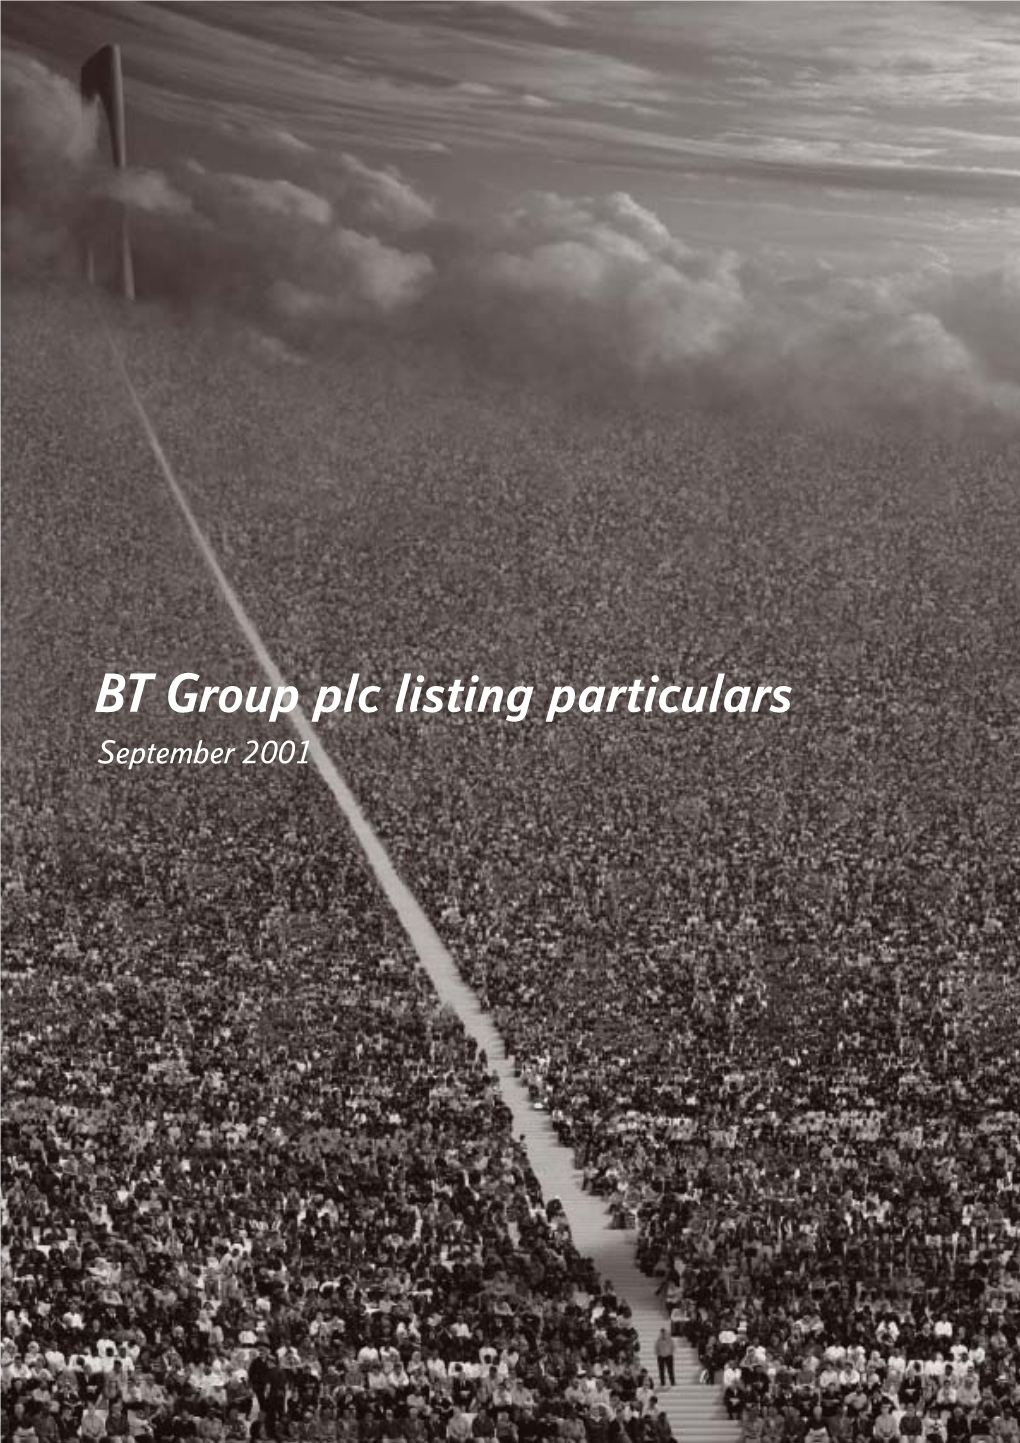 BT Group Plc Listing Particulars September 2001 Shareholders Are Advised to Read the Enclosed Documents Carefully